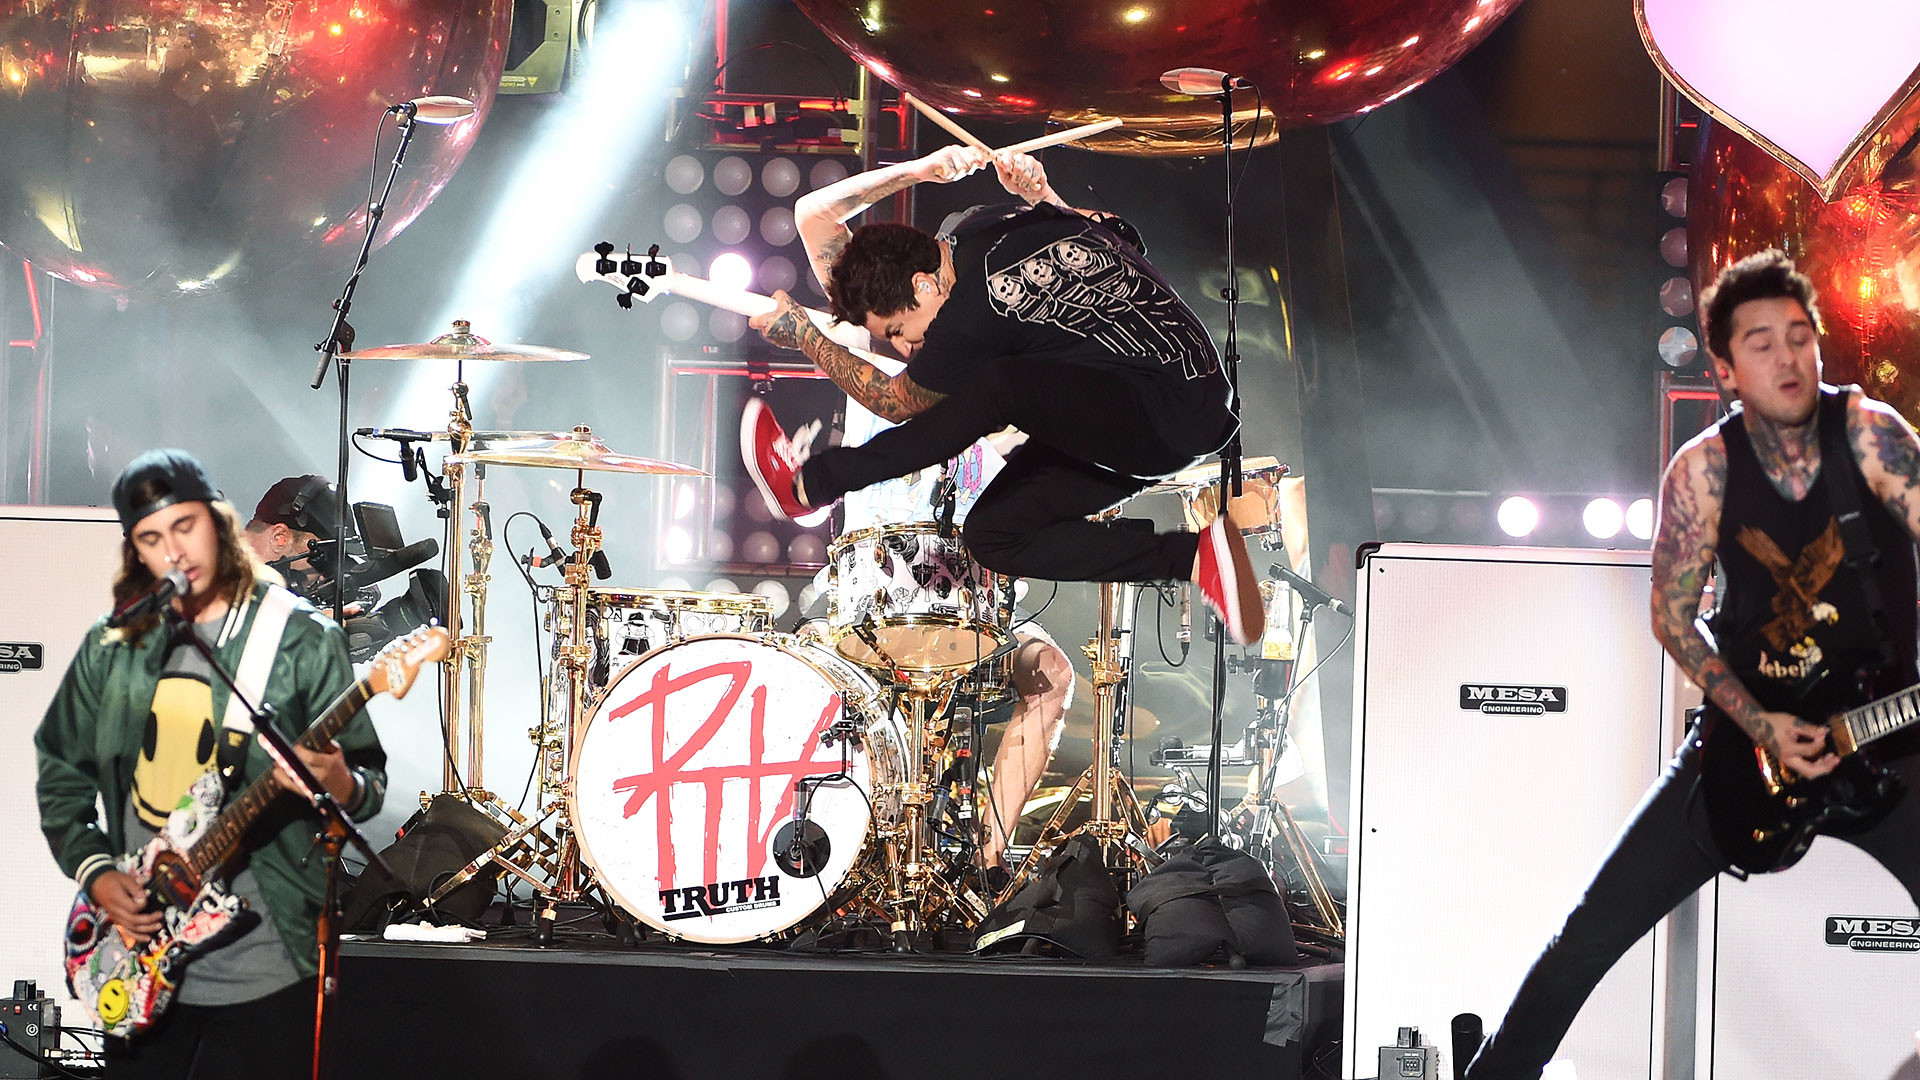 1920x1080 HD Quality Wallpaper | Collection: Music,  Pierce The Veil